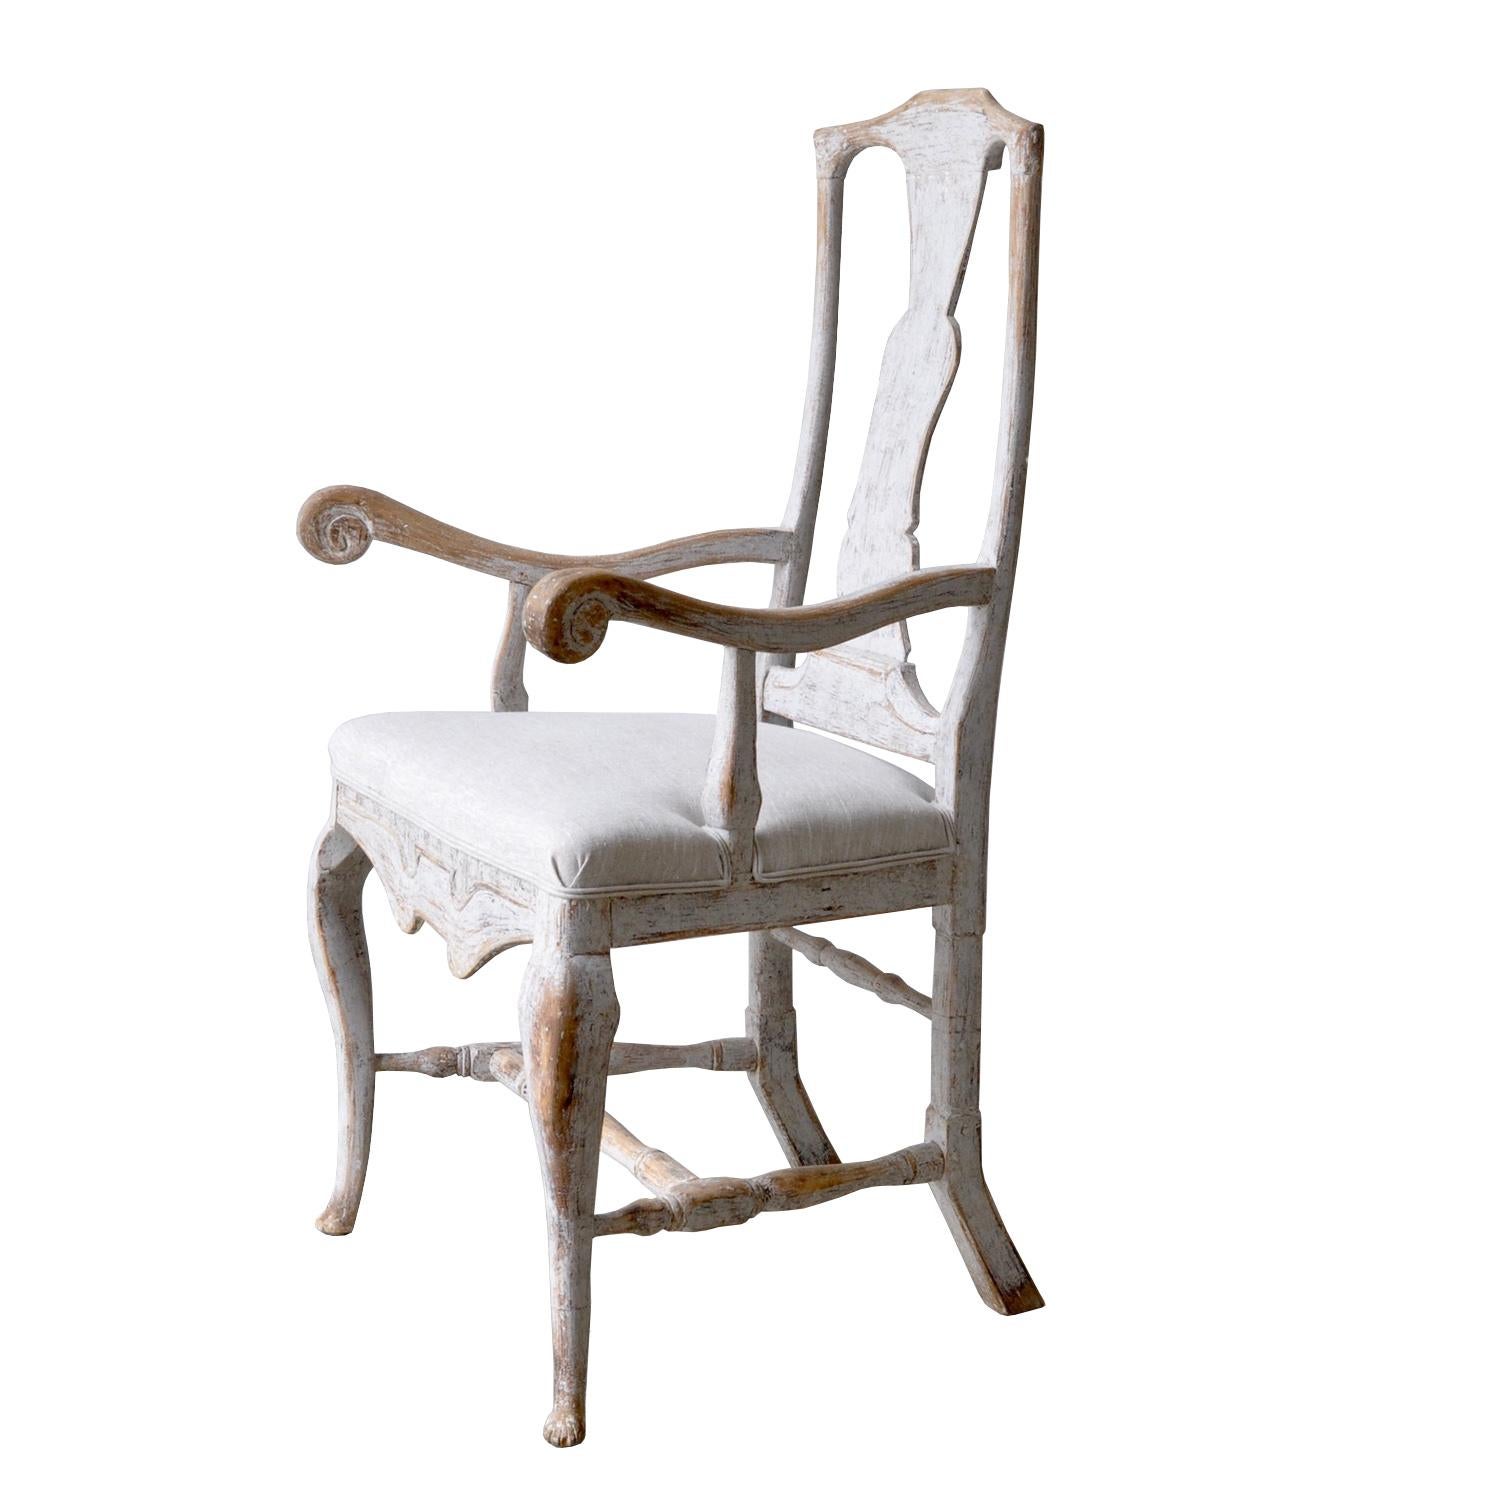 A large period Baroque armchair reupholstered in Belgium linen, and repainted in soft grey.